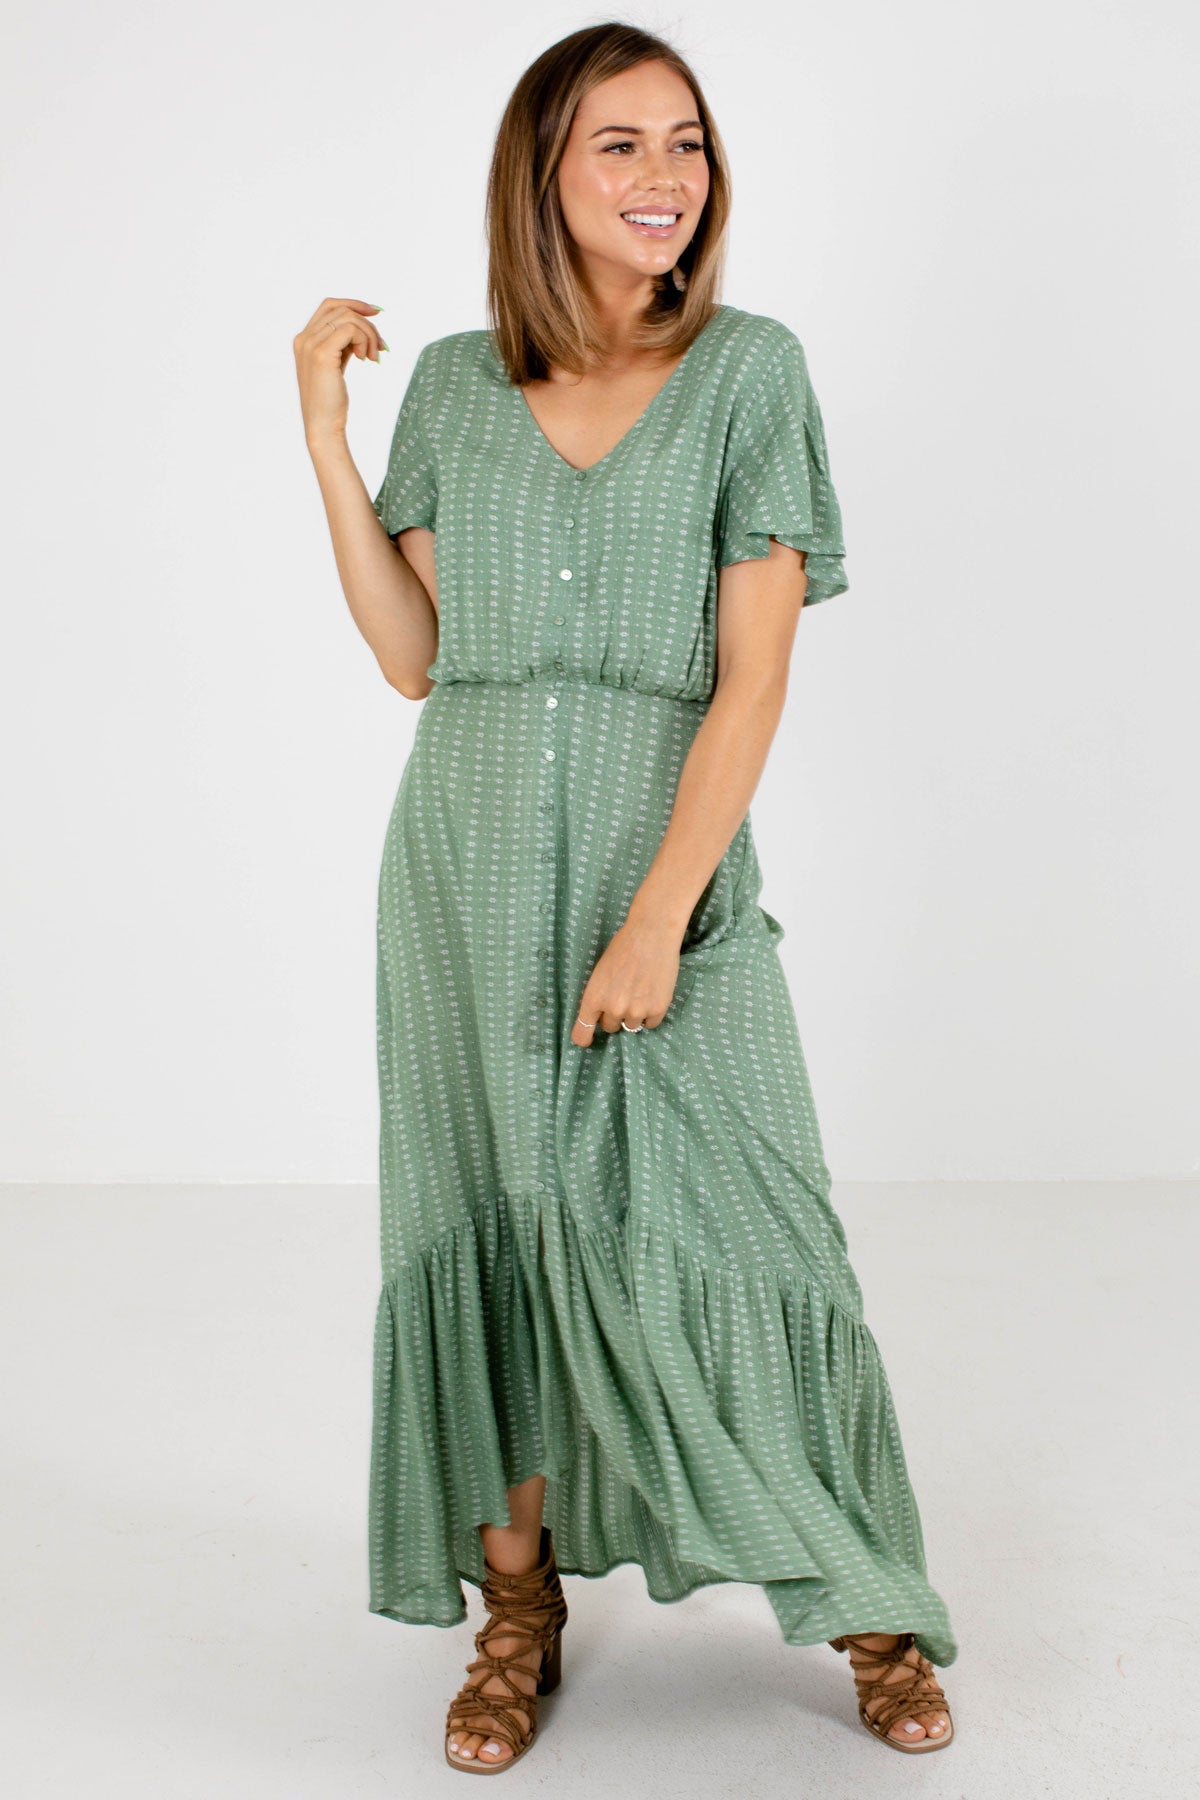 Green Cute and Comfortable Boutique Maxi Dresses for Women